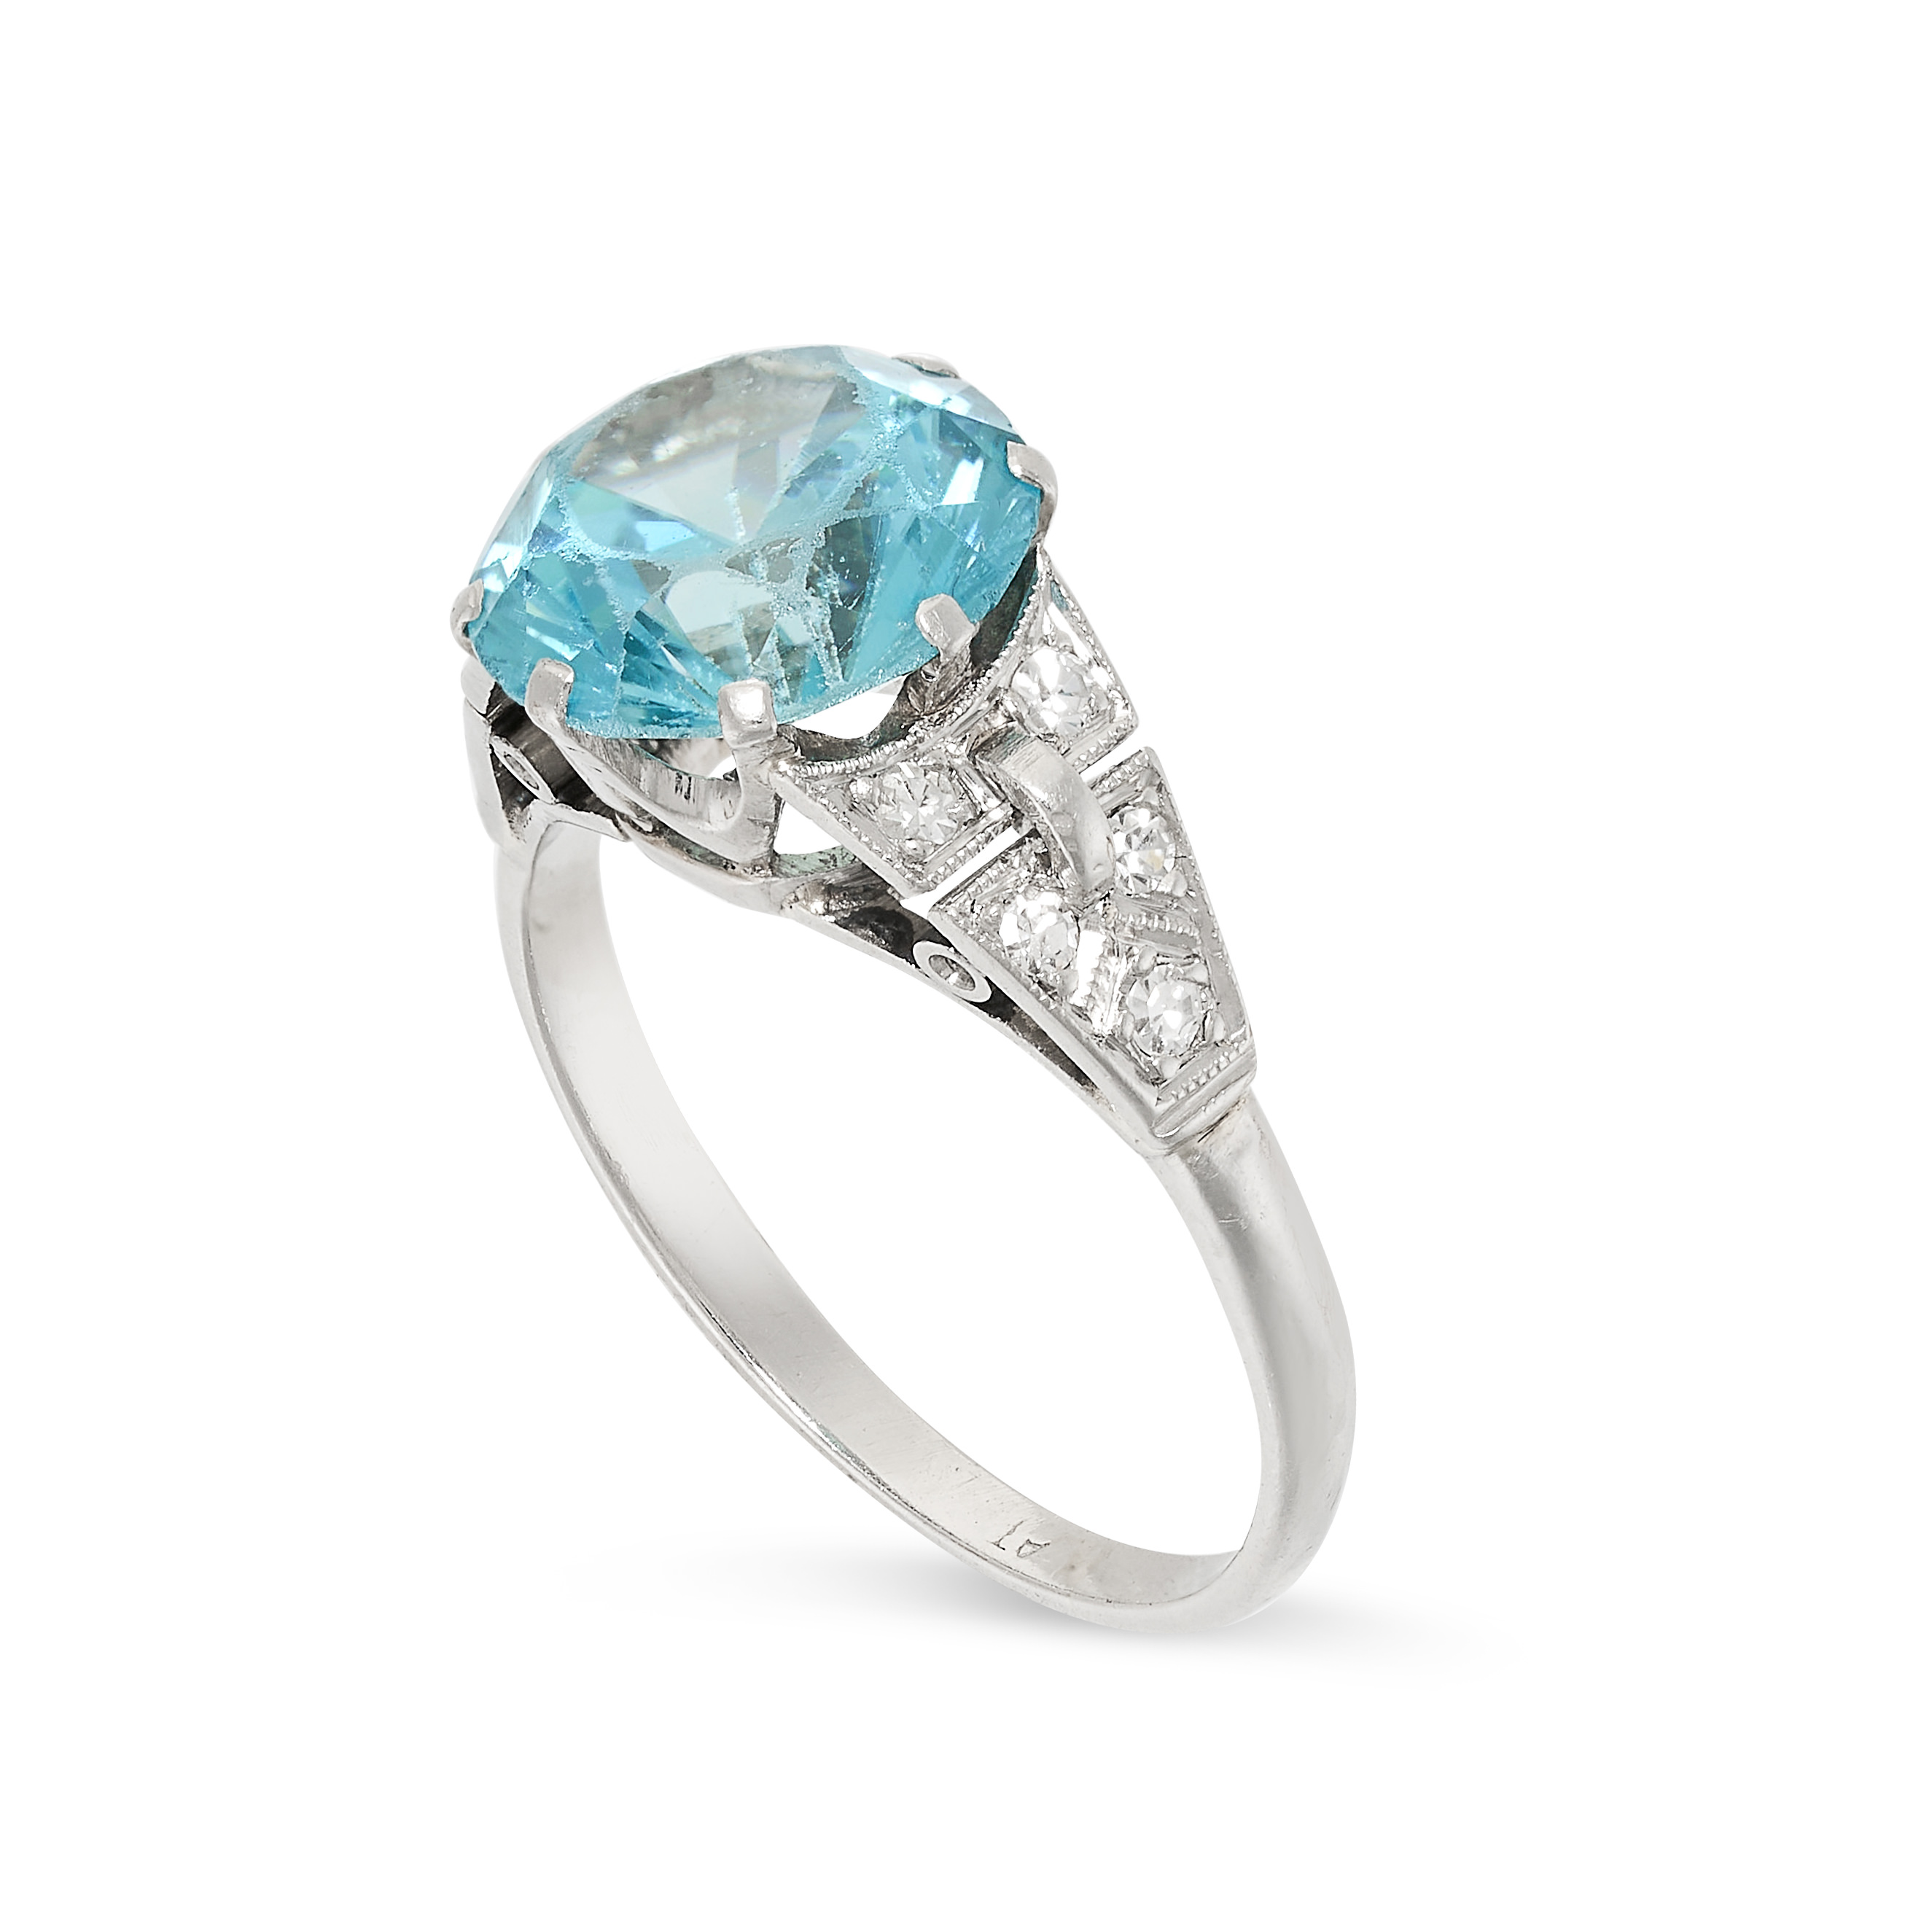 NO RESERVE - AN ART DECO BLUE ZIRCON AND DIAMOND DRESS RING, CIRCA 1930 in platinum, set to the - Image 2 of 3